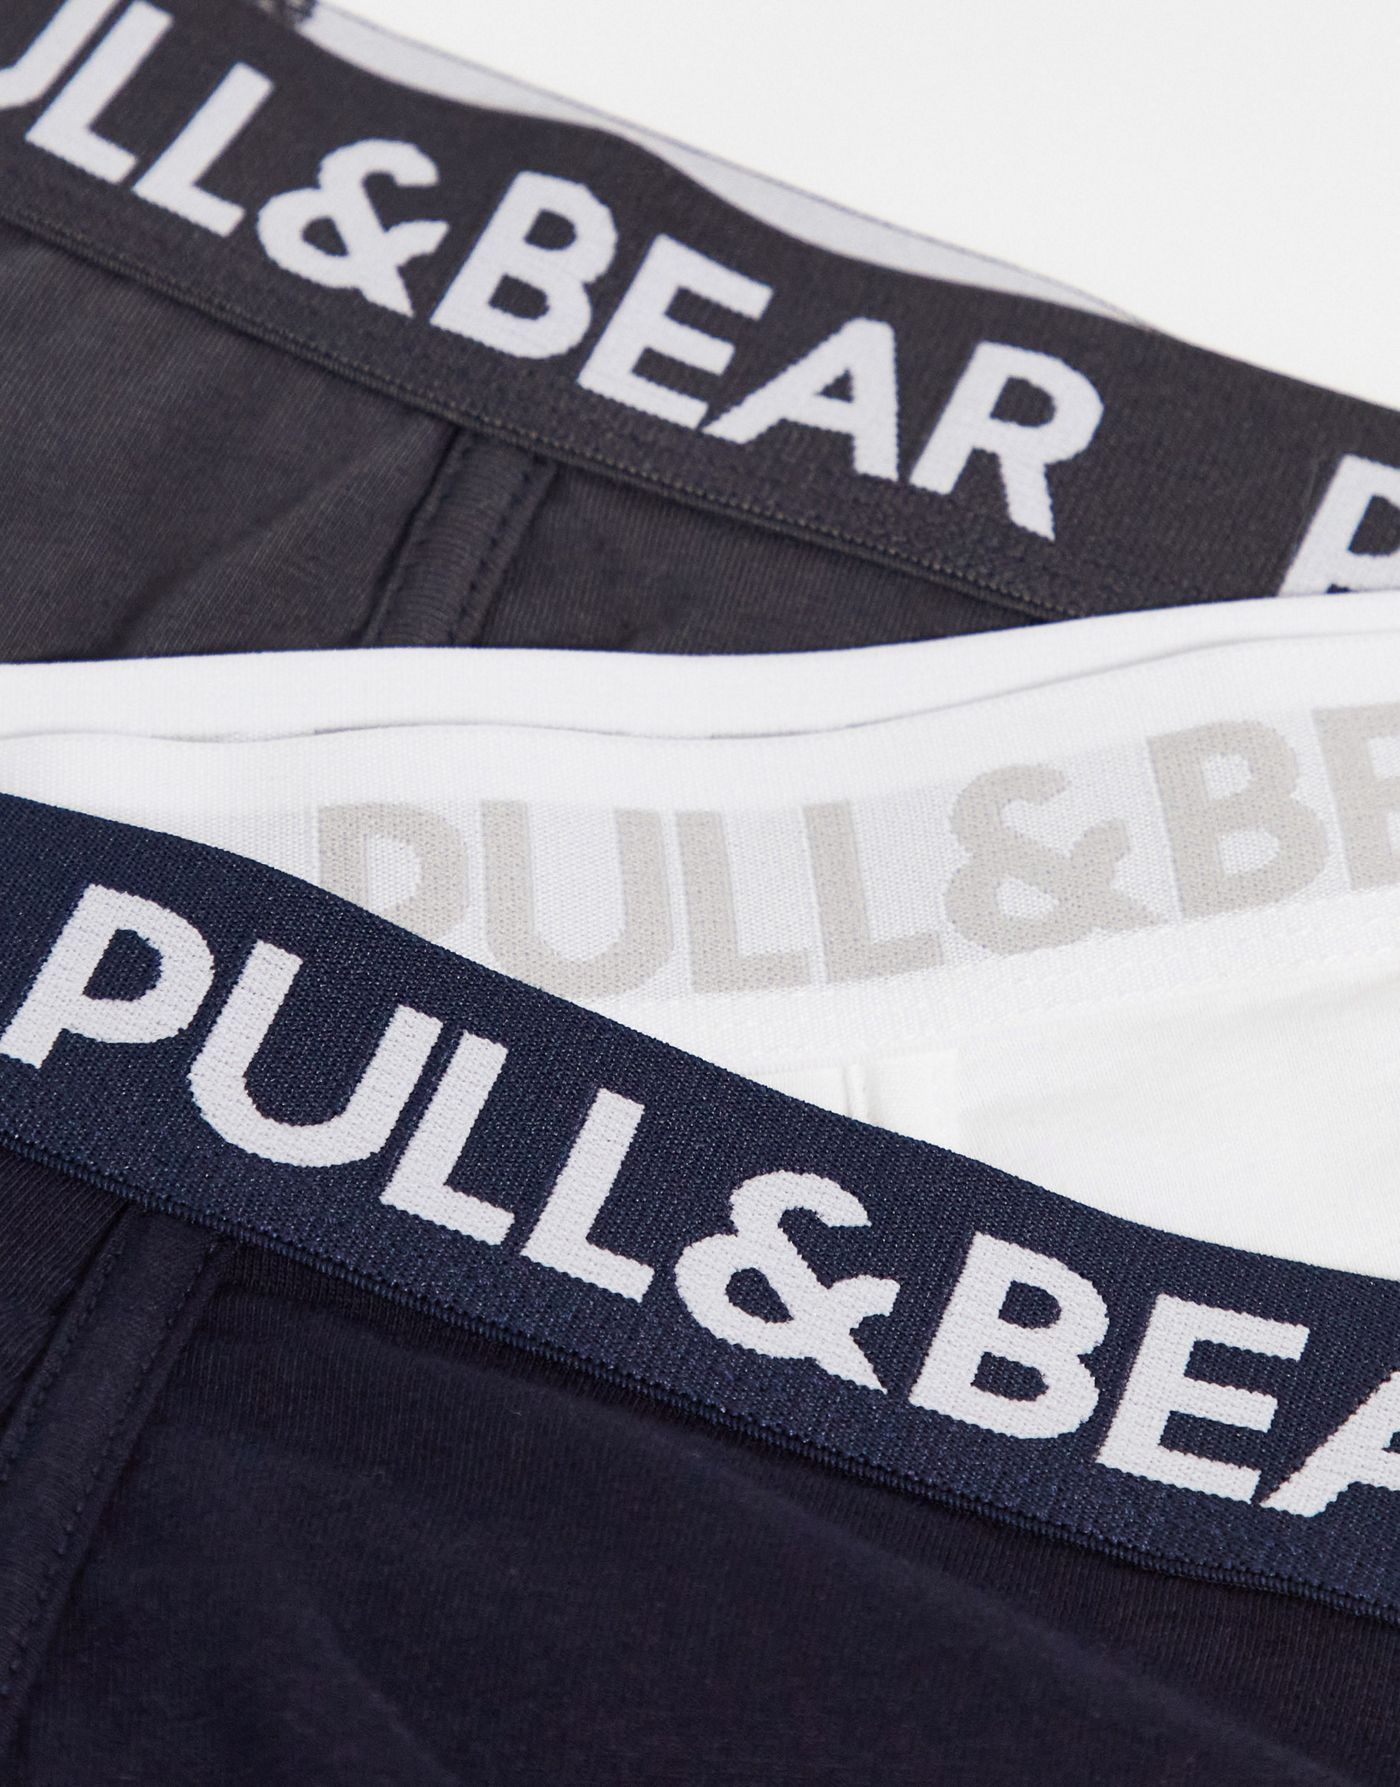 Pull&Bear 3 pack boxers in white, grey and navy 